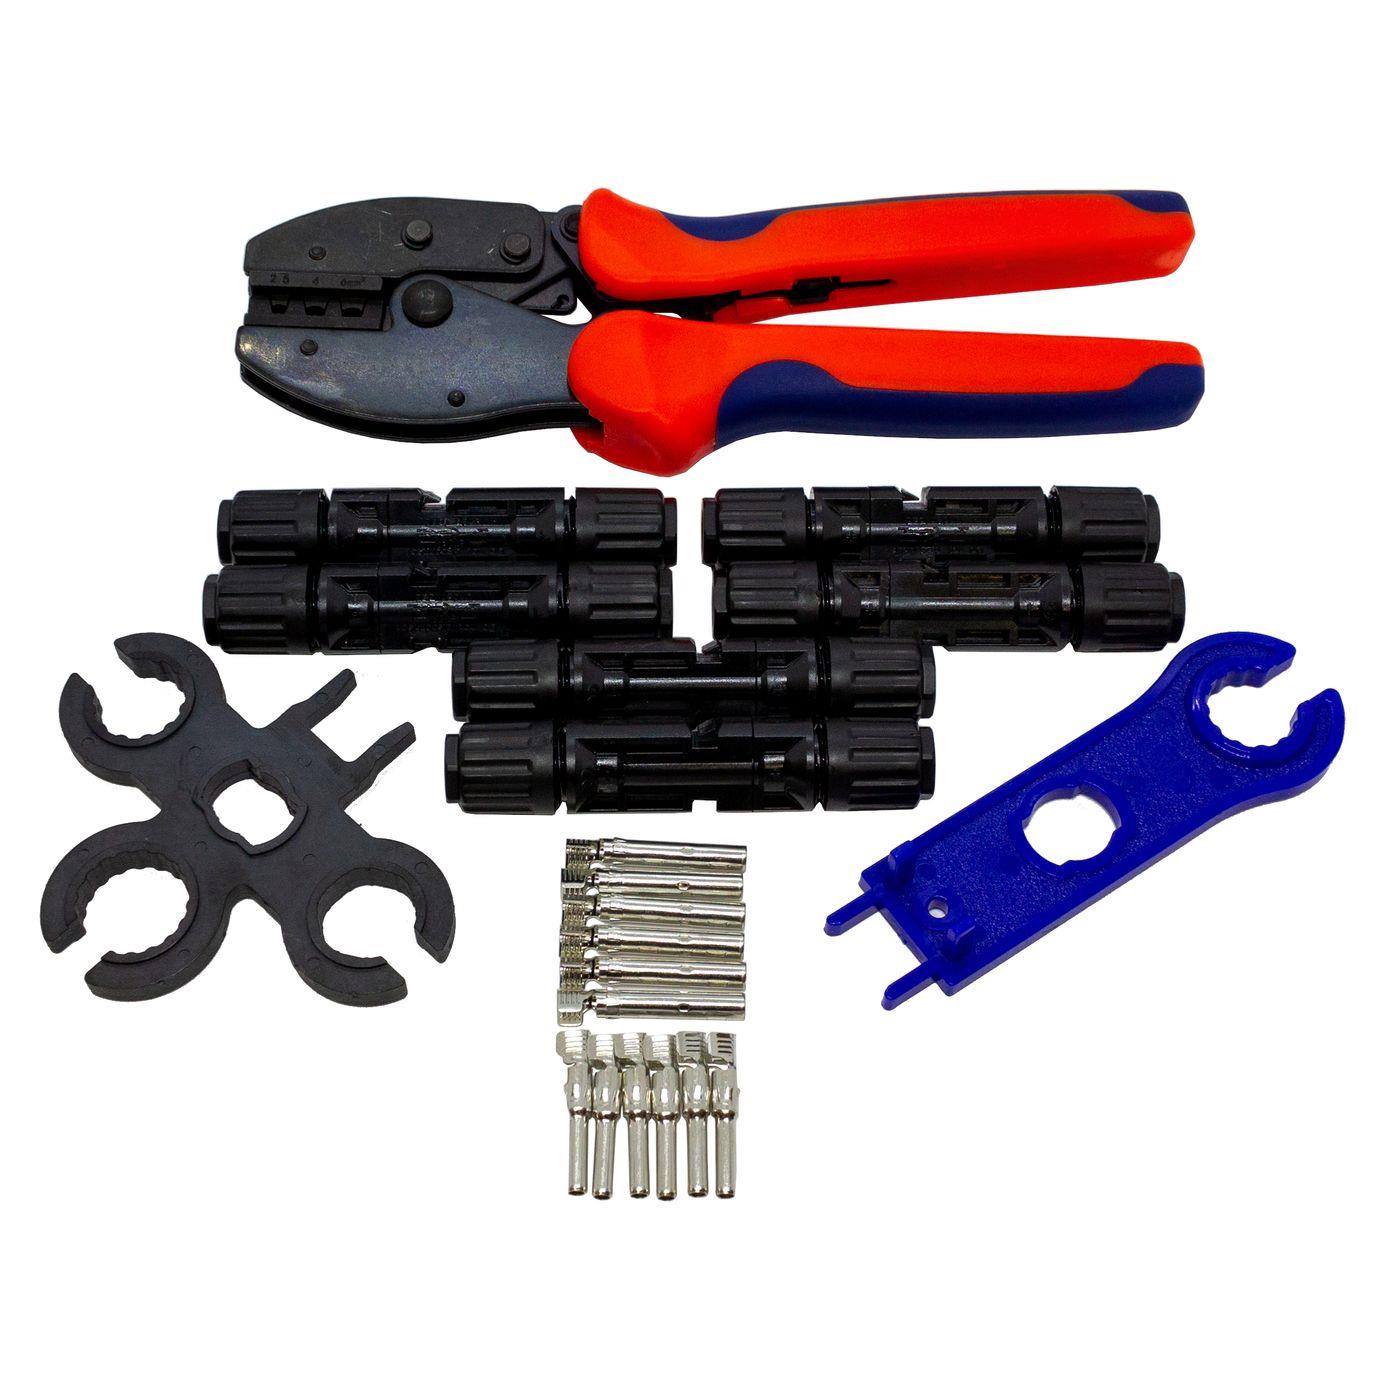 Solar Connectors Set incl. Photovoltaics Crimping pliers and Mounting key 2,5....6mm² 1000V DC 30A IP67 -40...+125°C